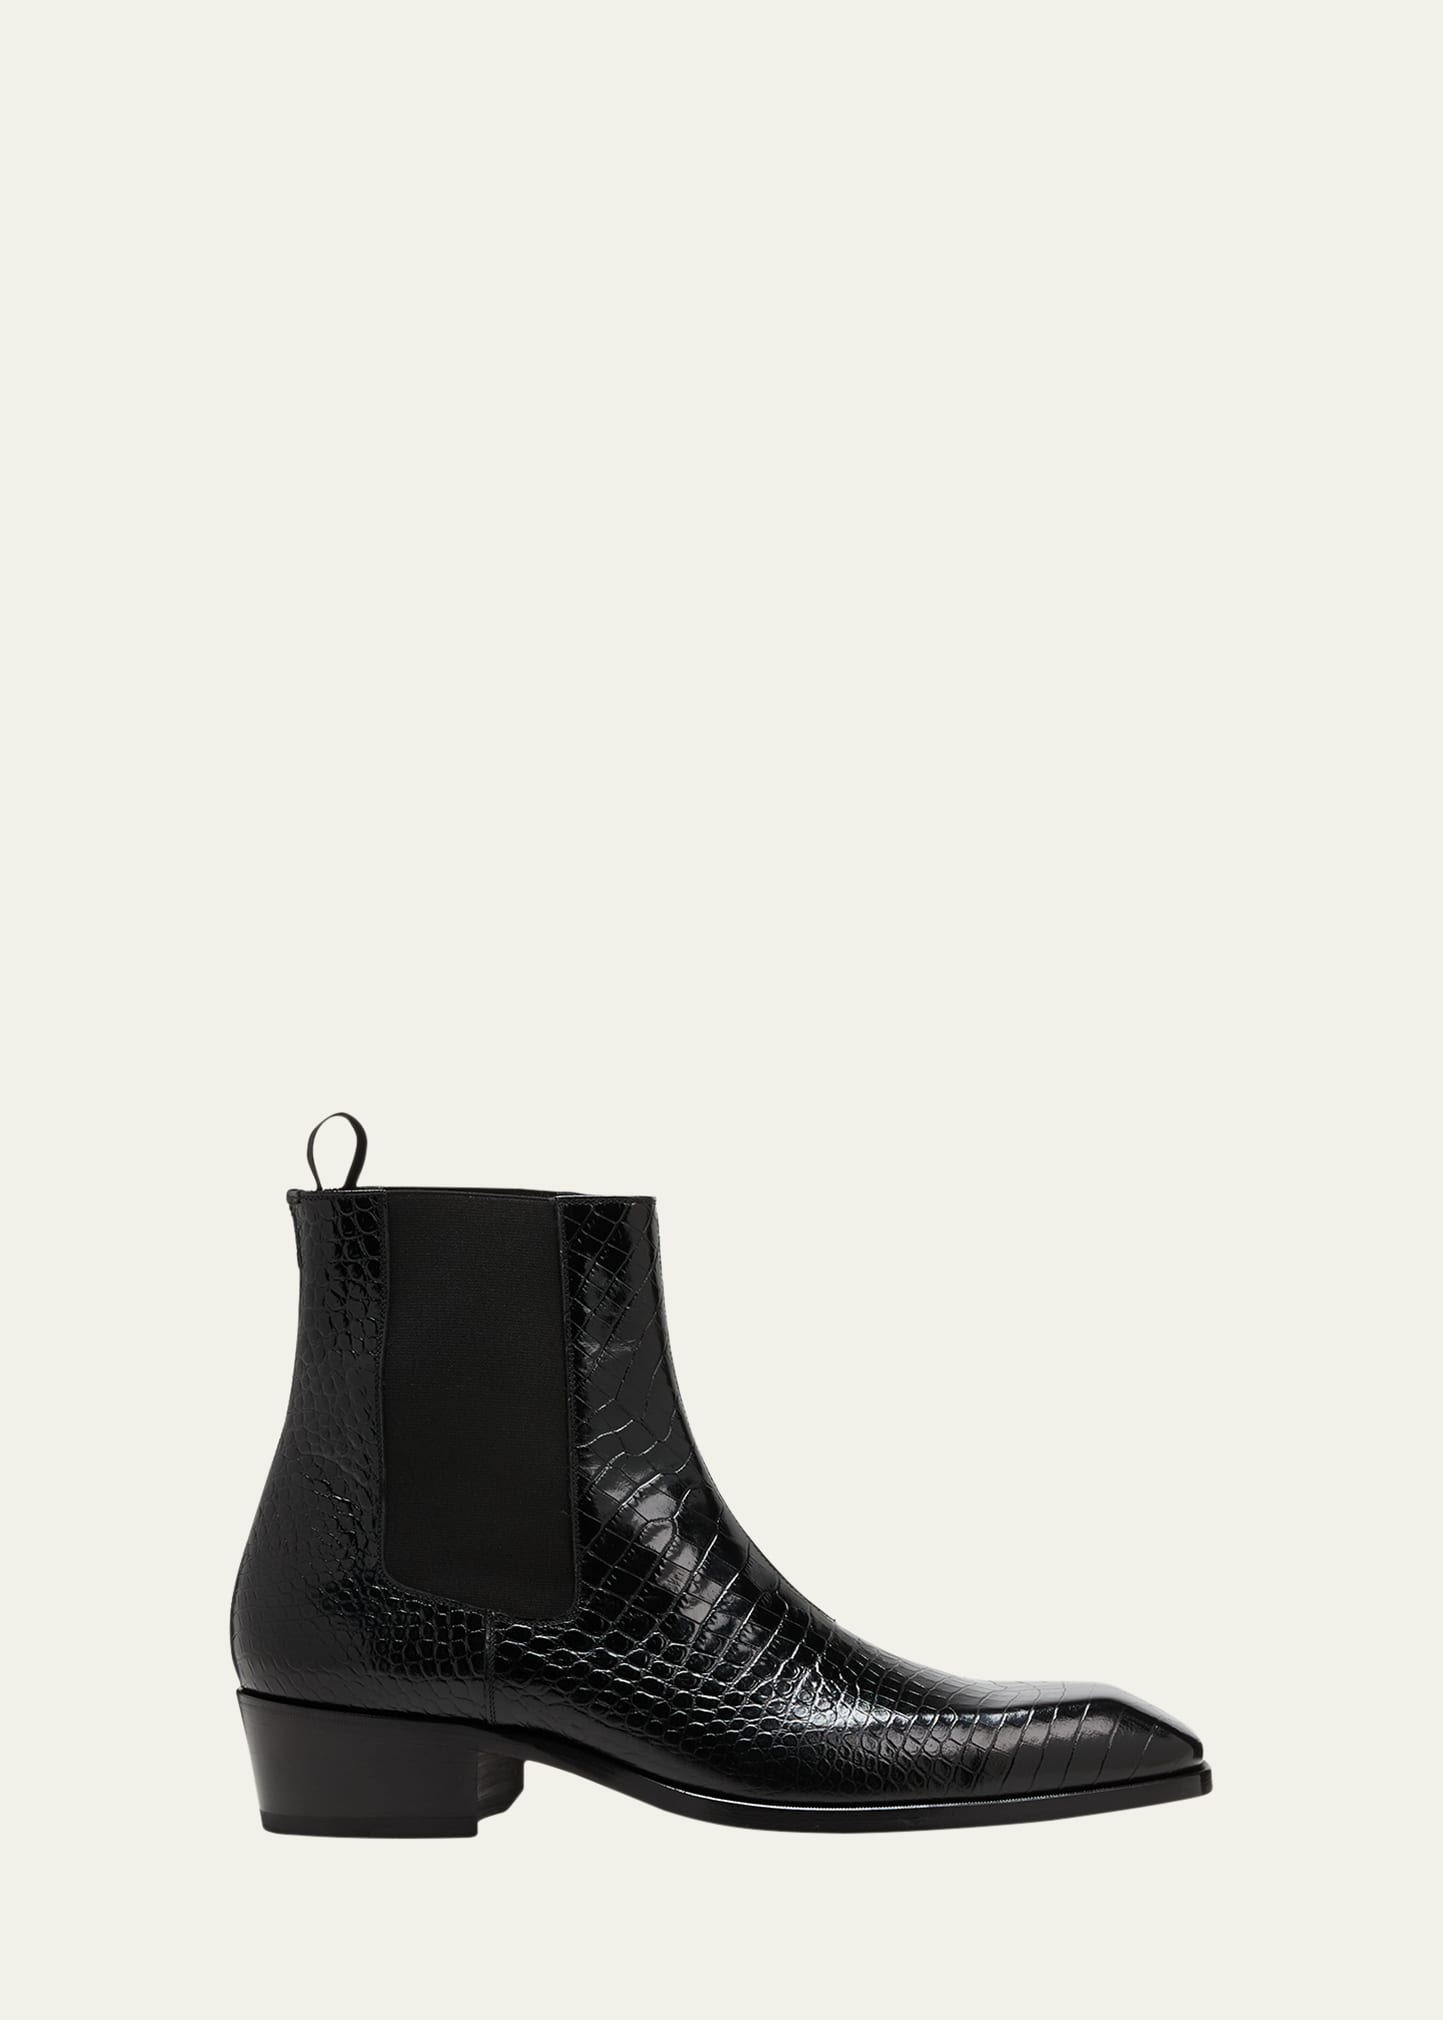 TOM FORD MEN'S BAILEY CROC-EFFECT CHELSEA BOOTS INTERNATIONAL SHIPPING